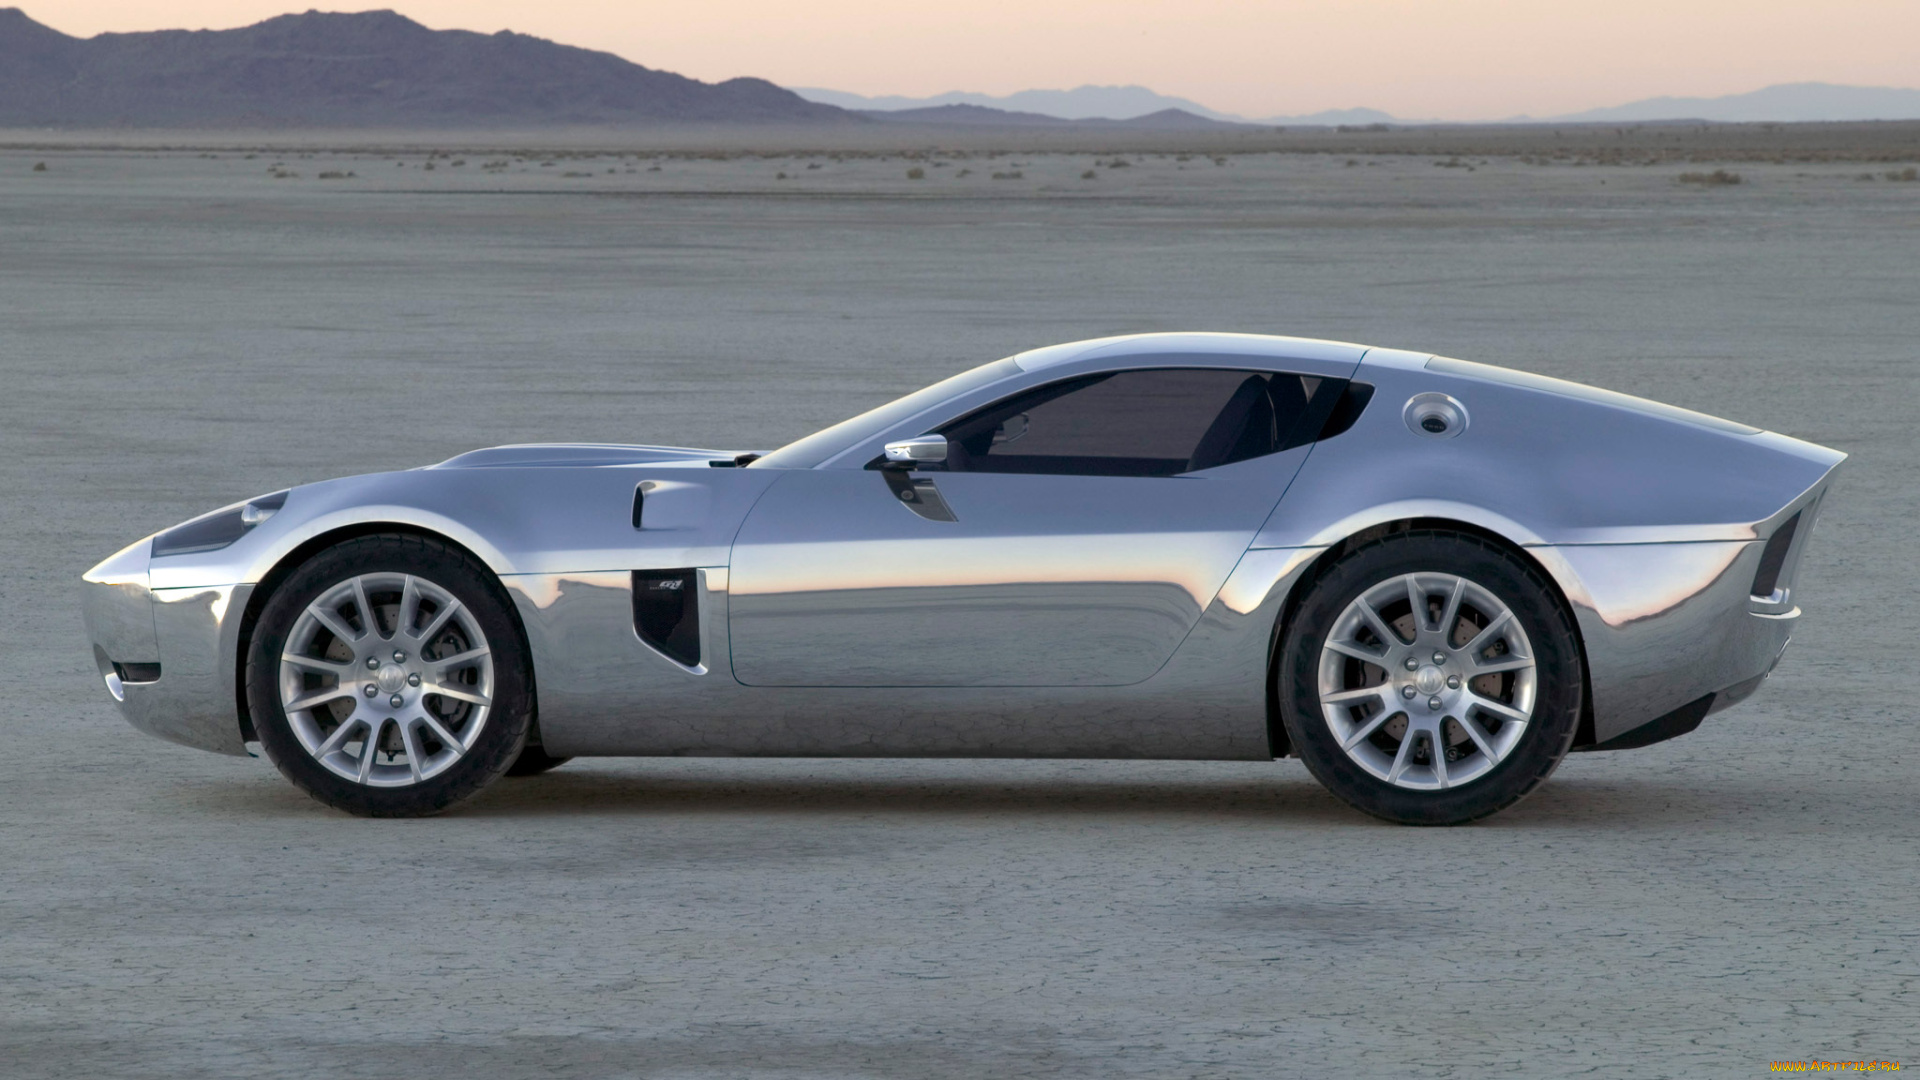 shelby, ford, gr-1, concept, 2005, автомобили, ac, cobra, shelby, concept, gr-1, ford, 2005